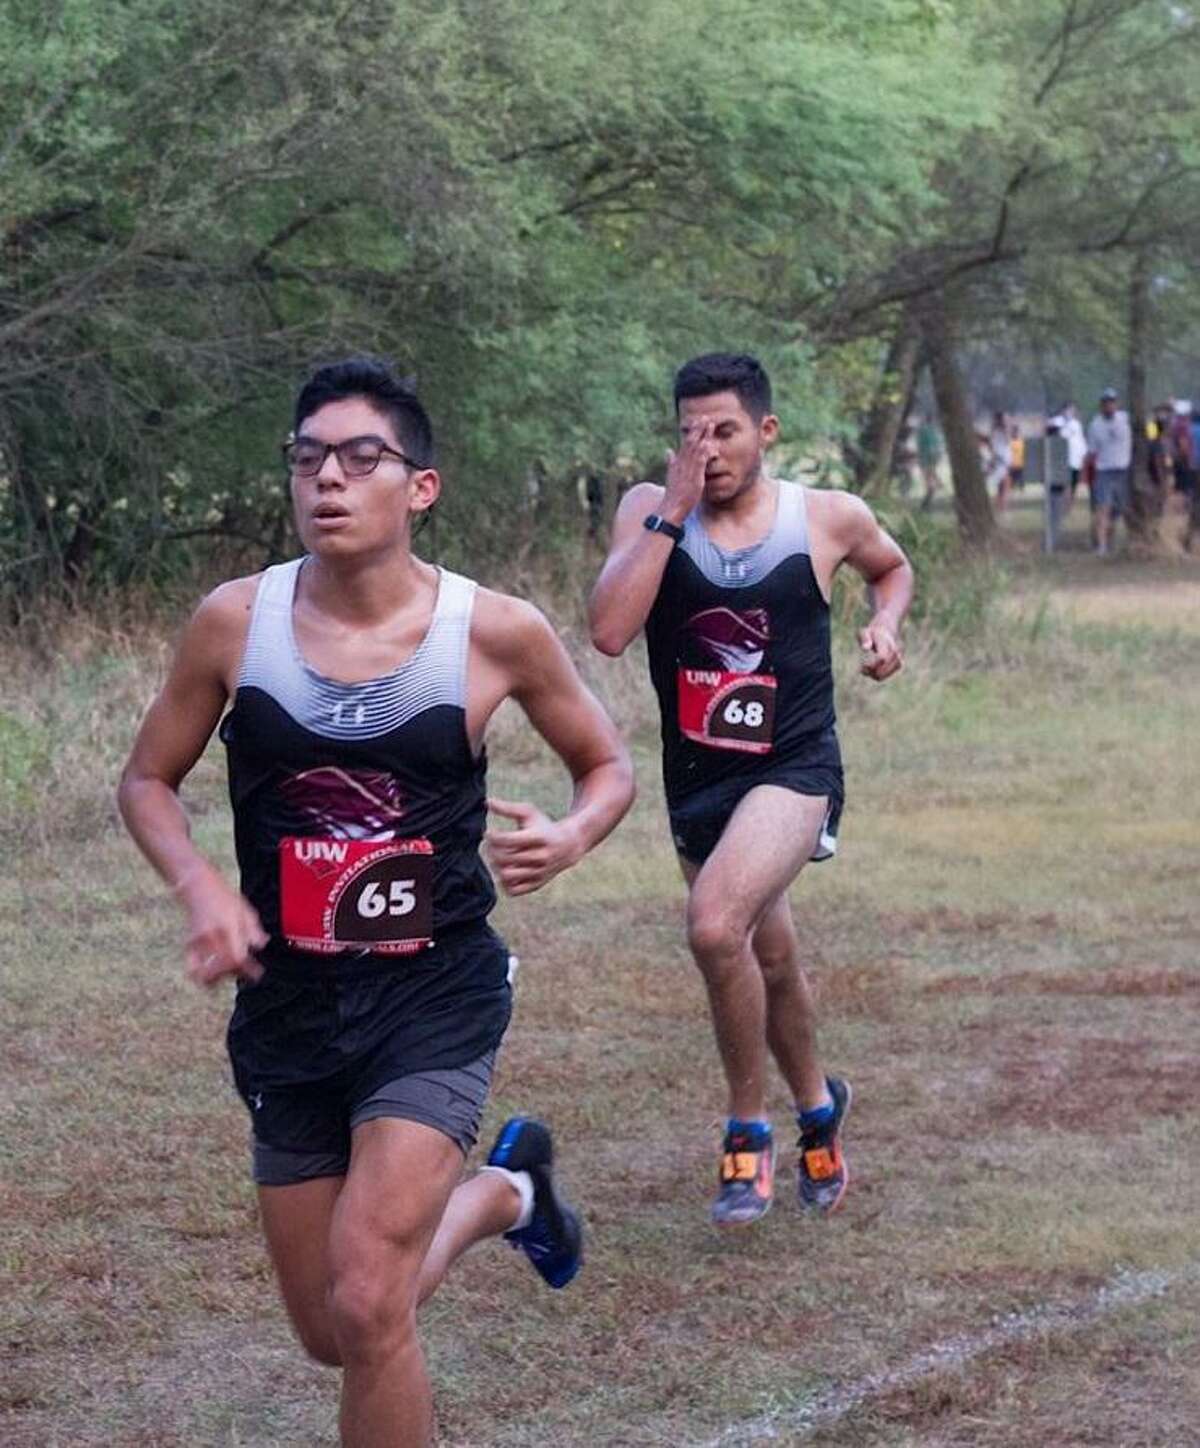 TAMIU will attempt to defend its title at the Saints Collegiate Cross Country Invitational on Saturday in San Antonio.